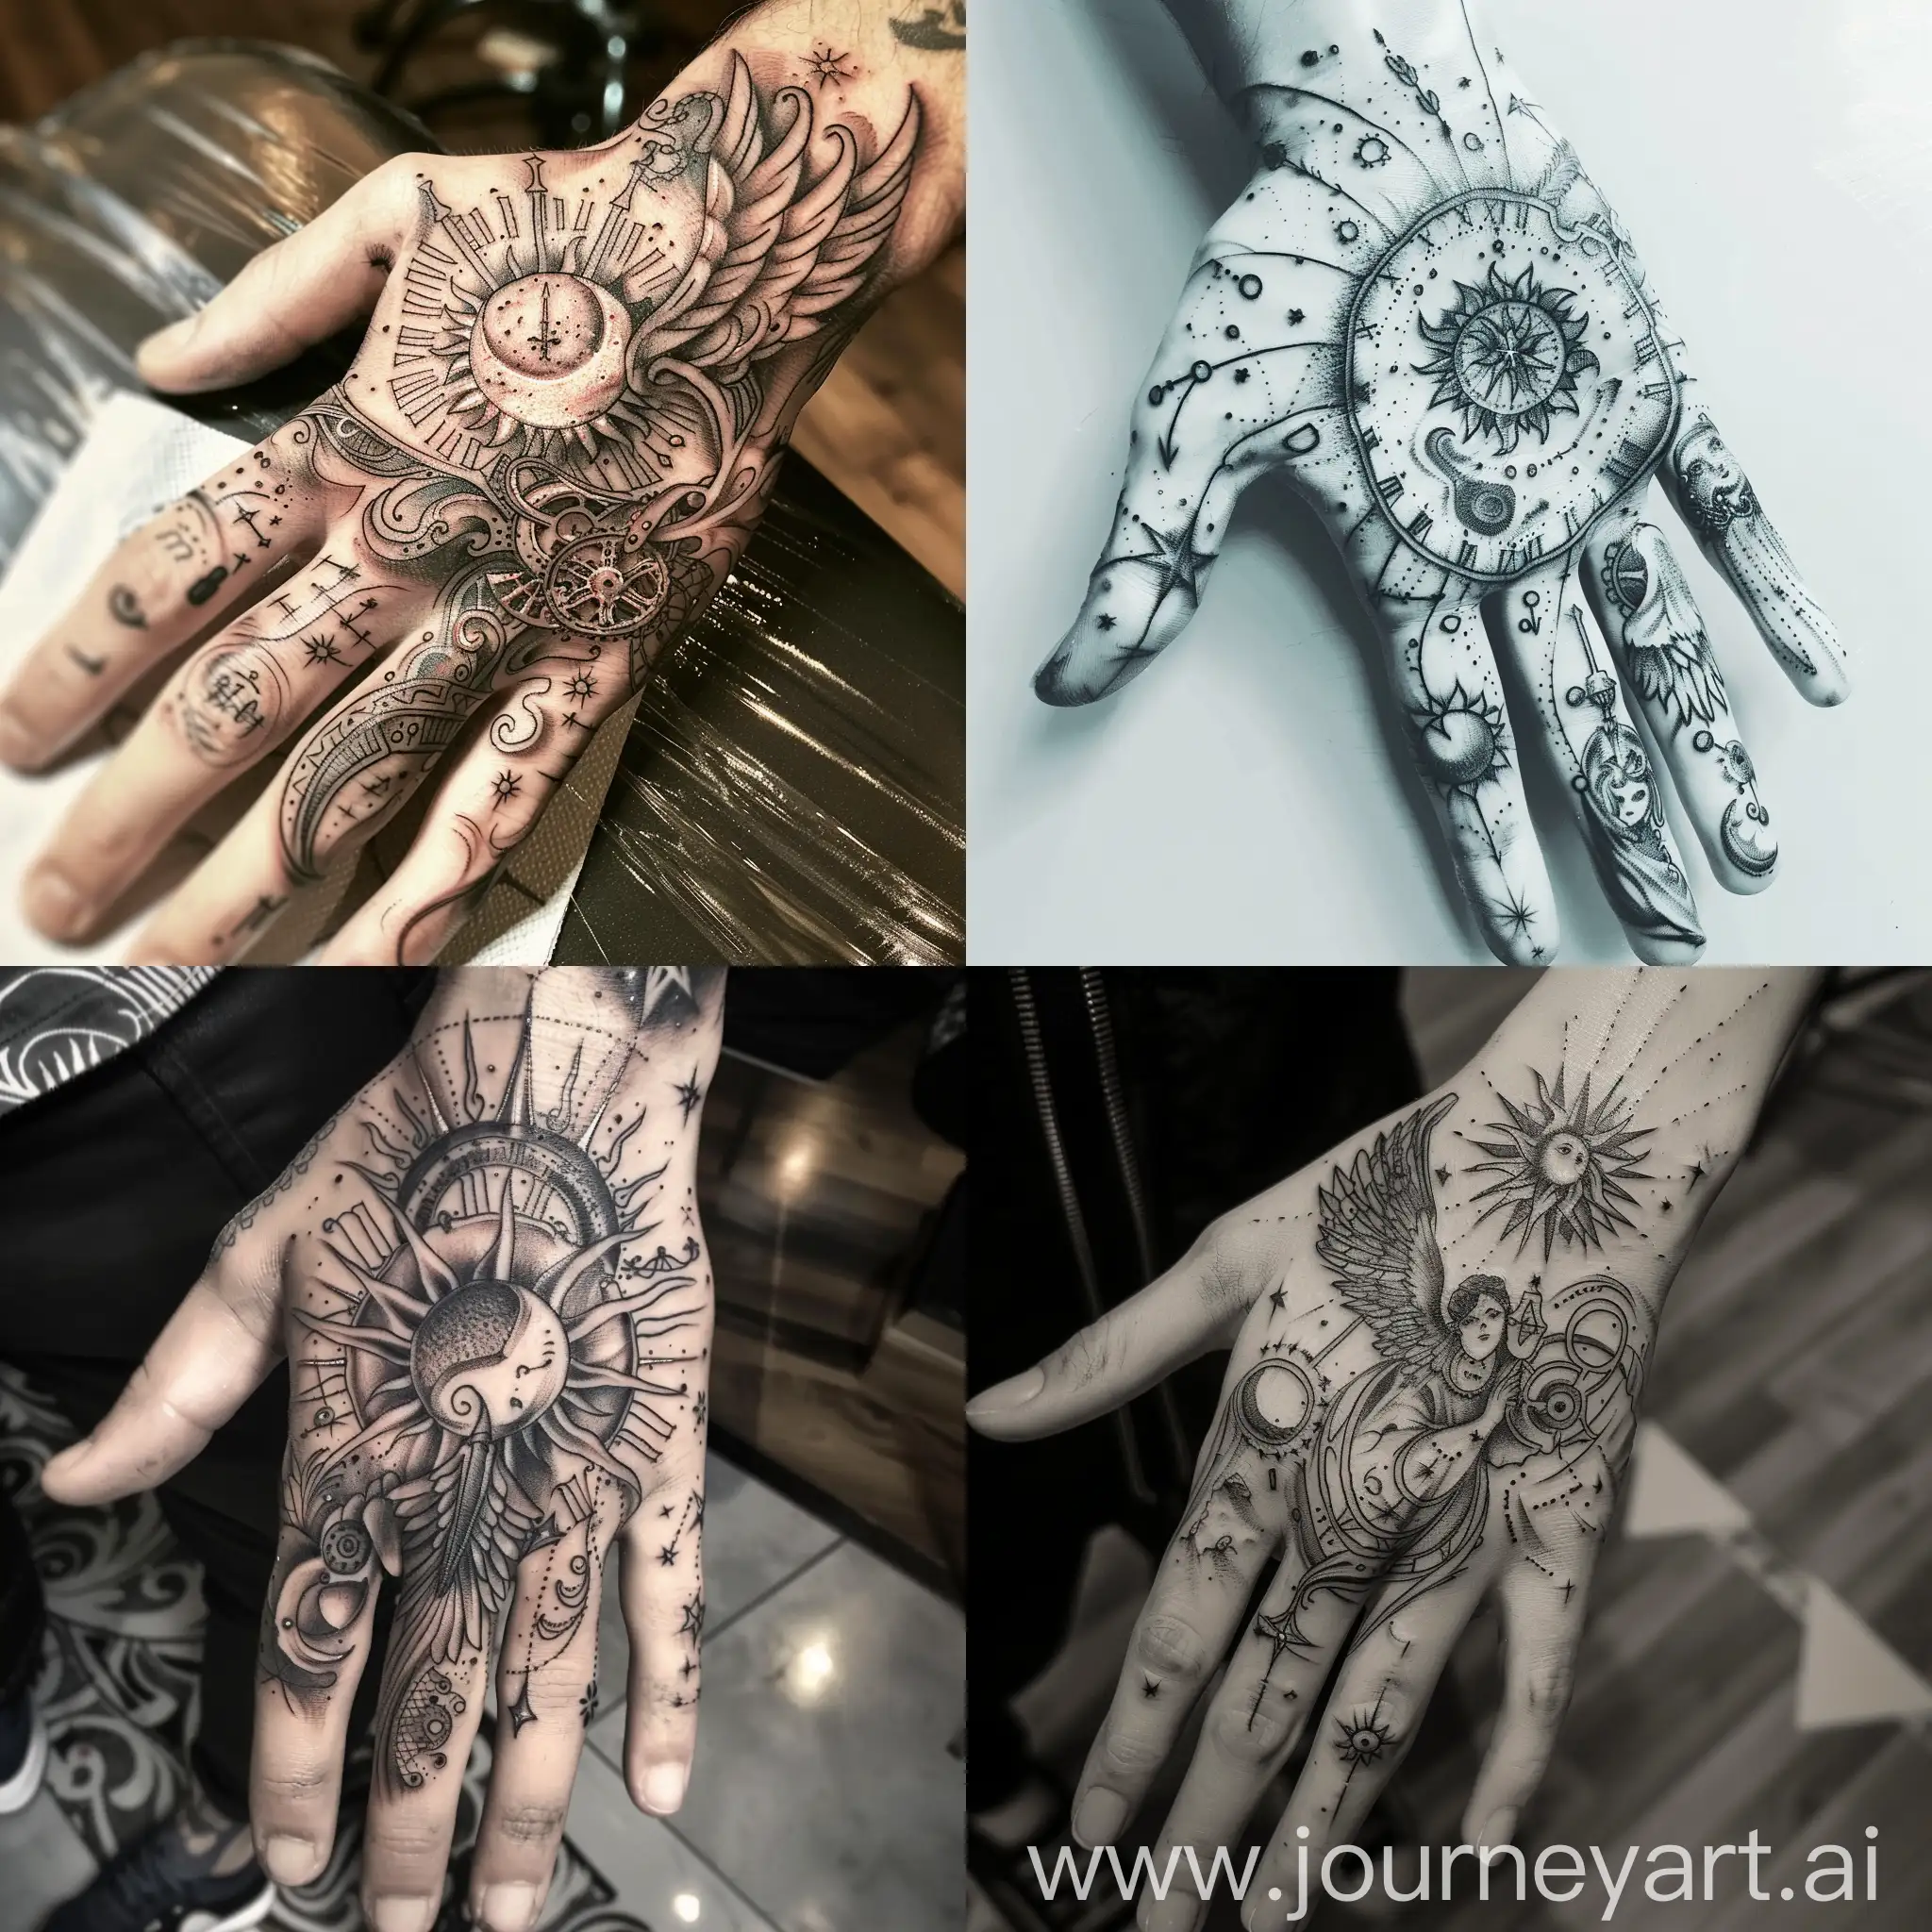 Timeless-Tattoo-Design-with-Celestial-Symbols-and-Guardian-Motifs